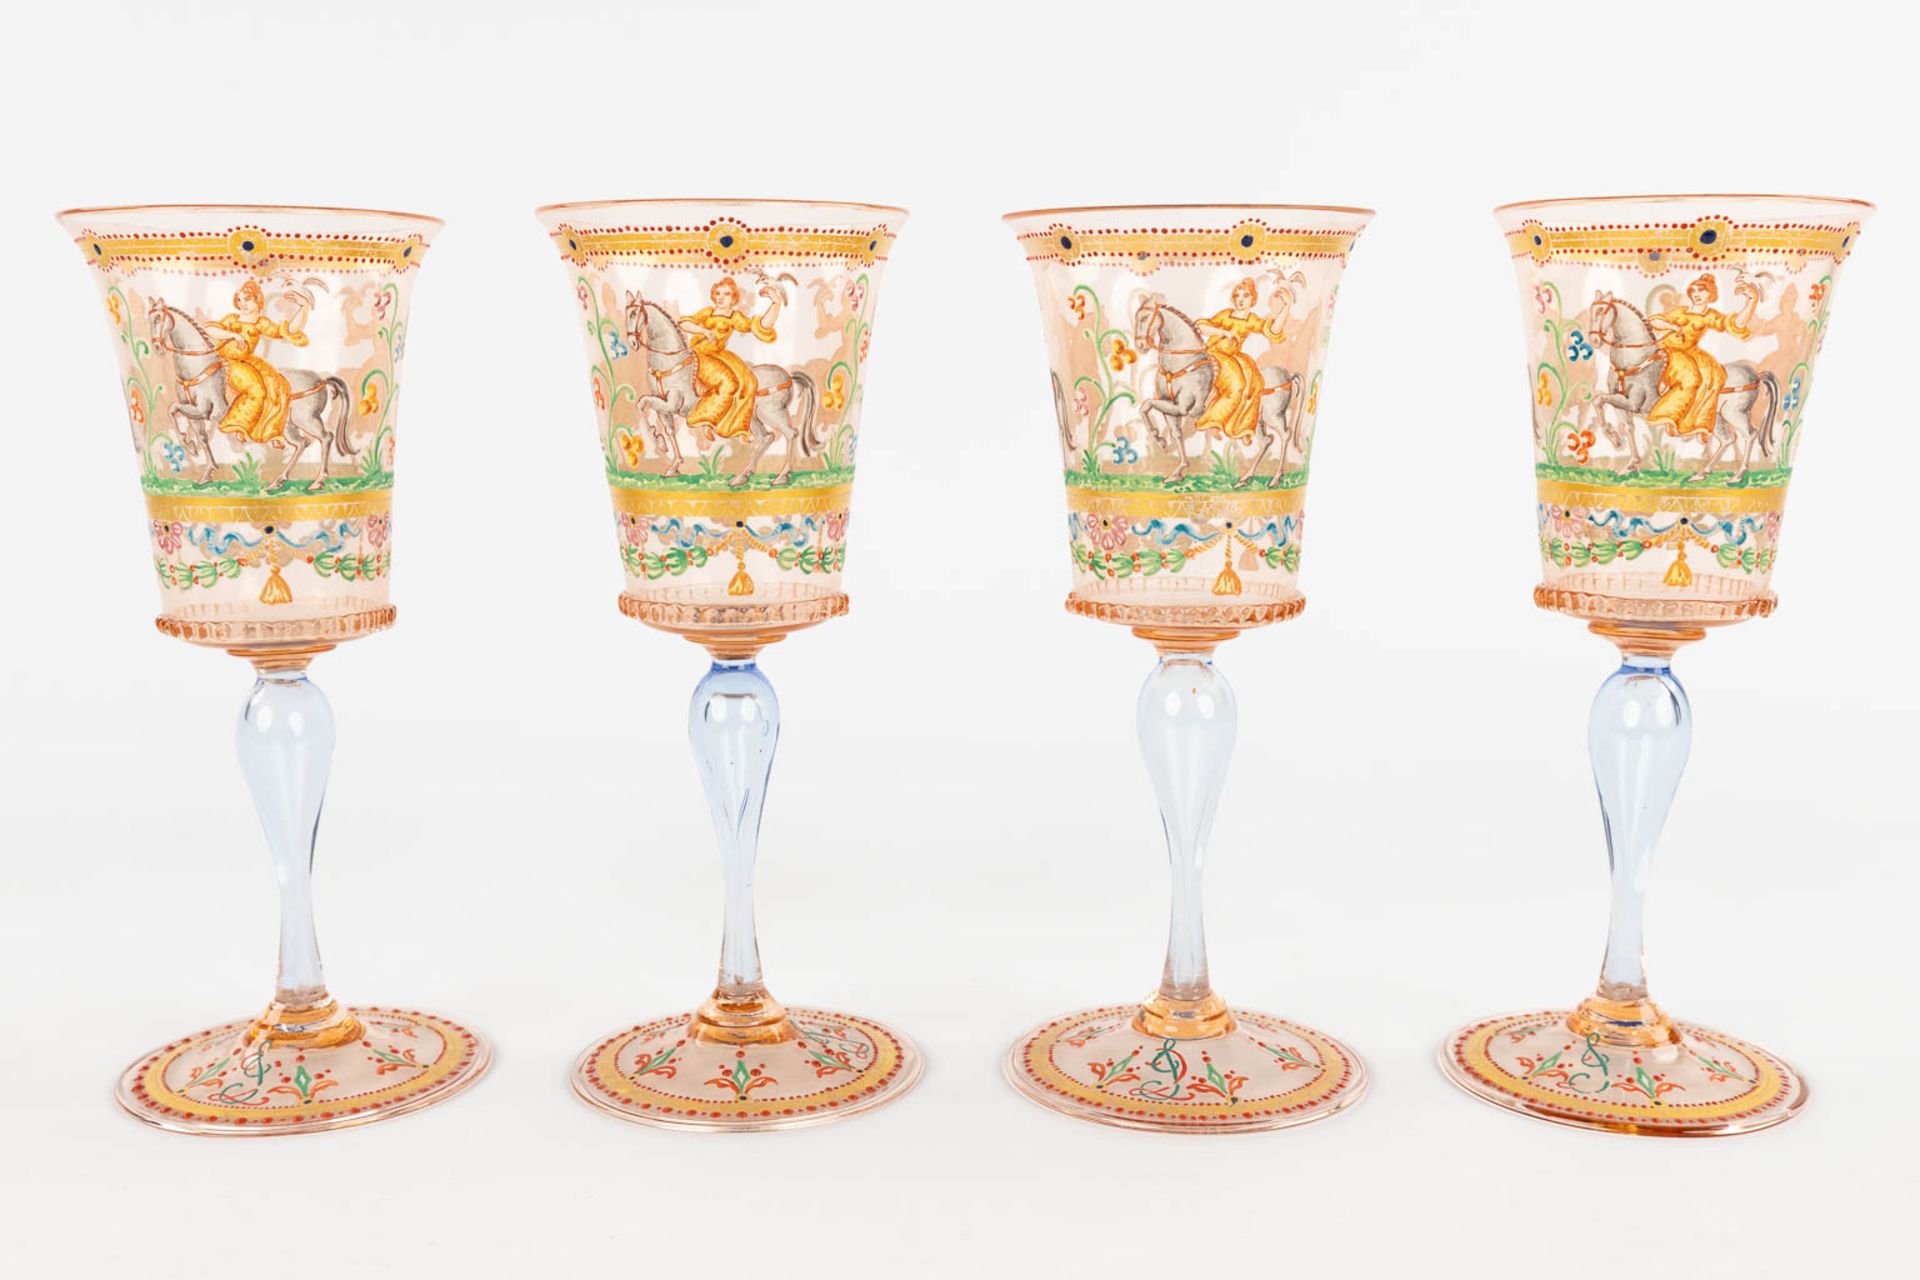 A set of 4 hand-painted and antique goblets, Murano, Salviati, 19th C. (H:17 x D:7 cm) - Image 5 of 16